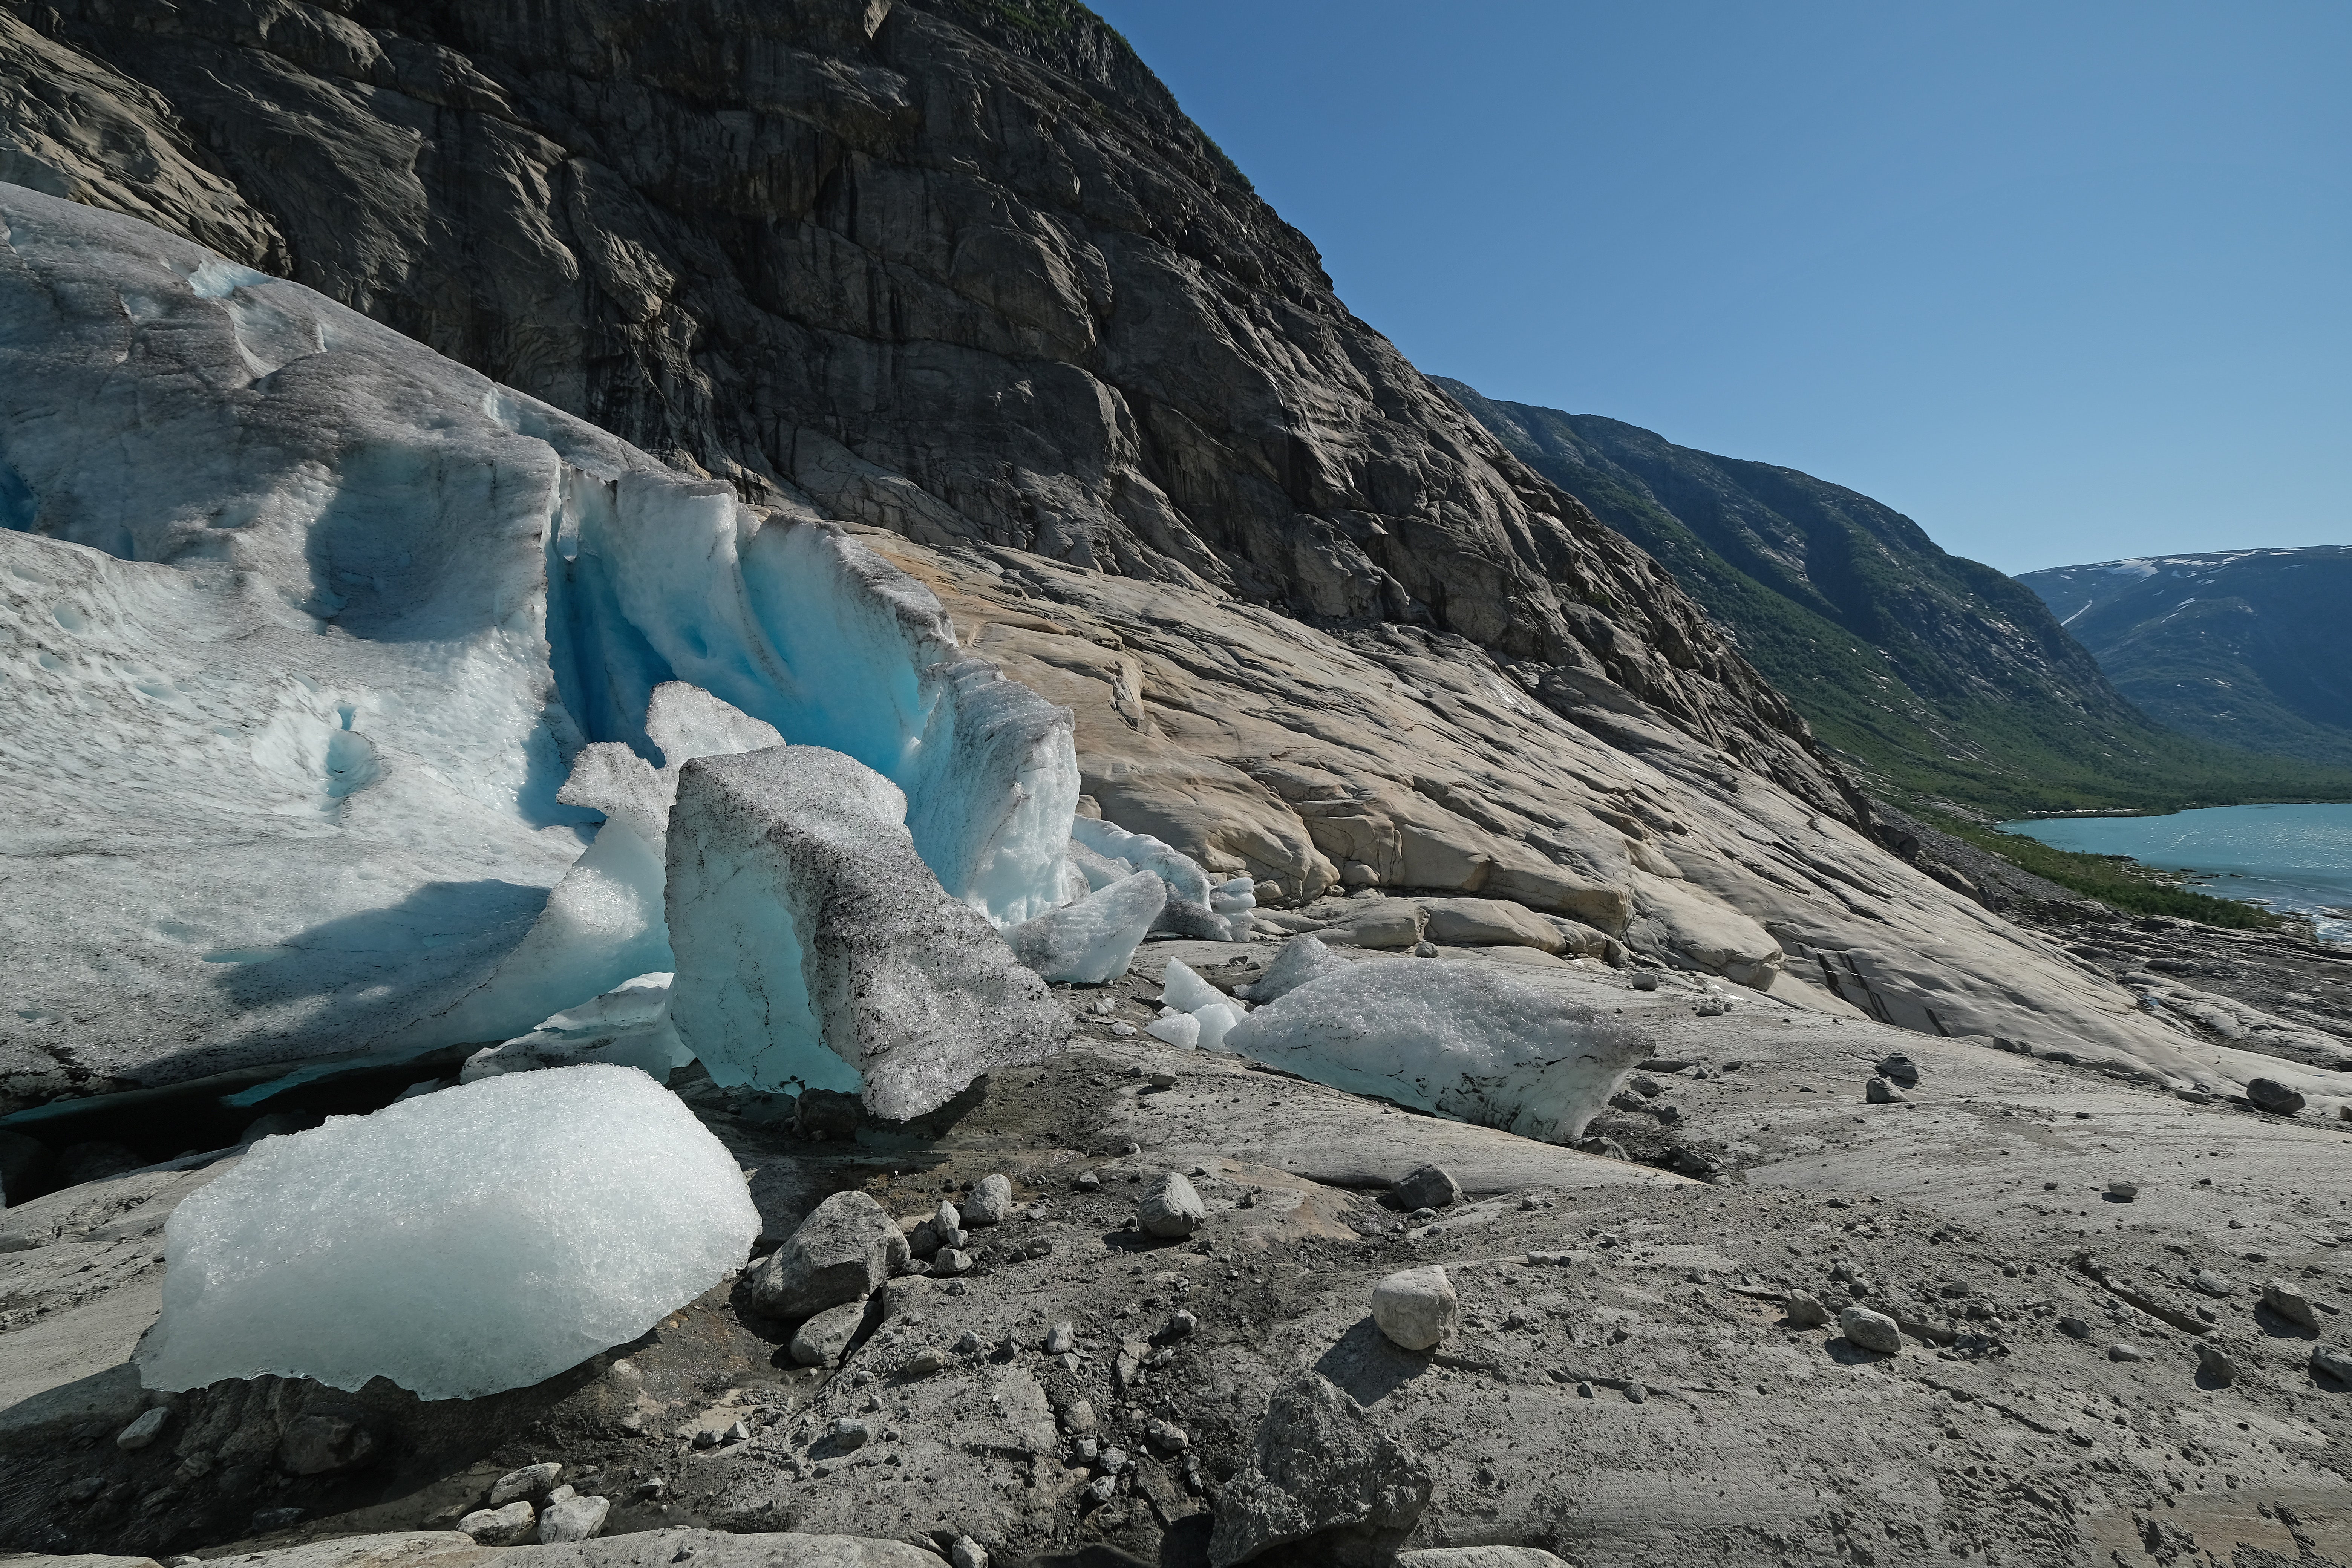 File image: Scientists believe ‘glacier blood’ could be an indicator of worsening climate crisis